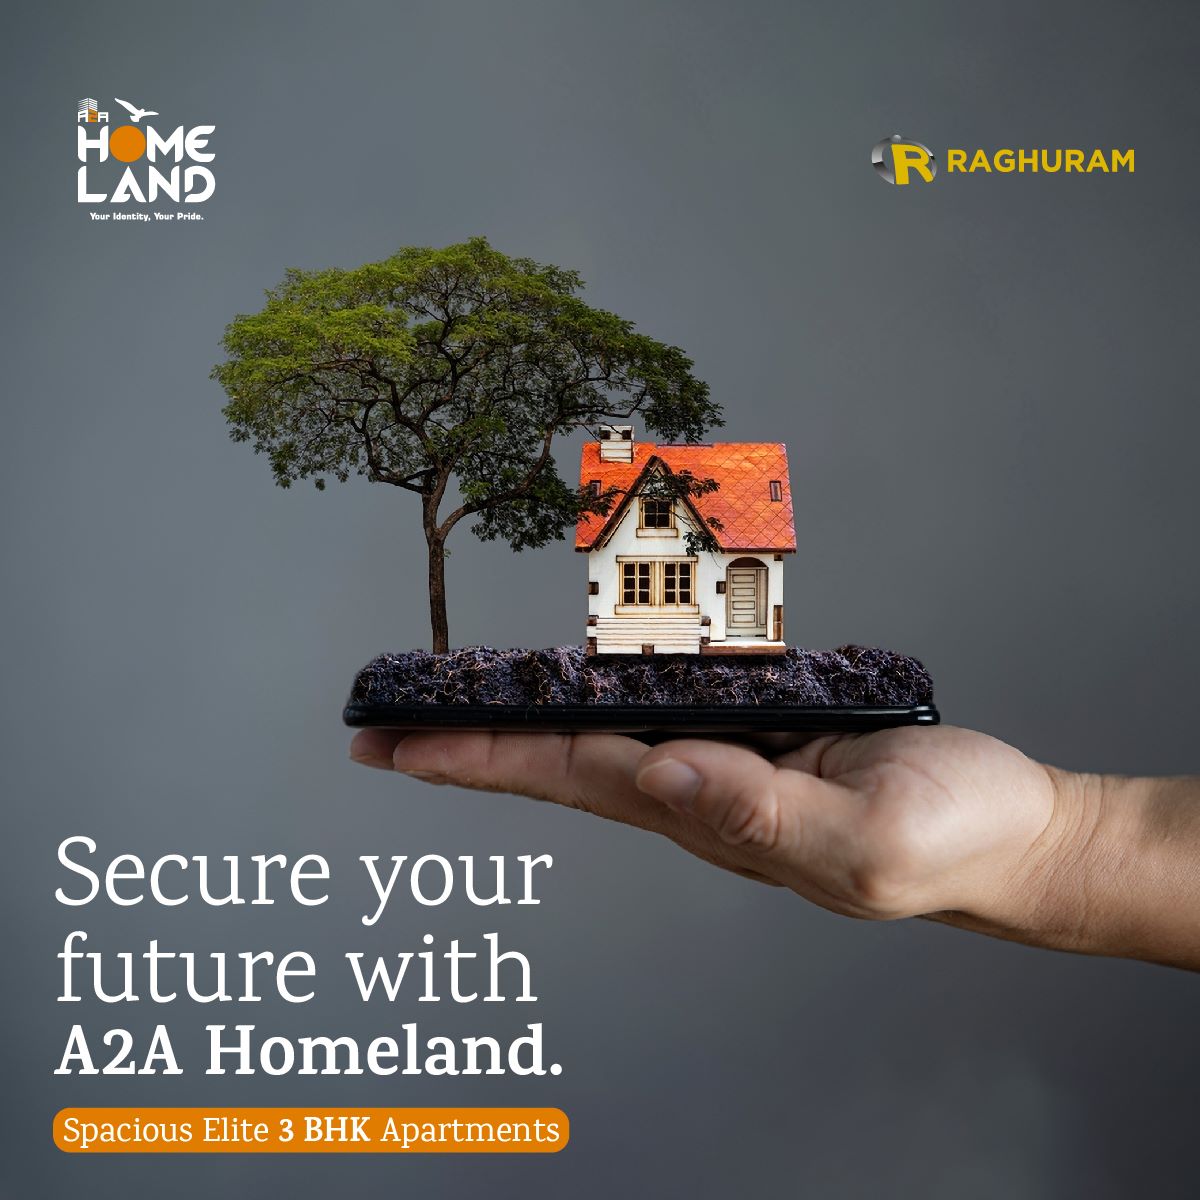 Invest today for a secure tomorrow. A2A Homeland's prime location, premium amenities, landscaped garden, & more make it the best #Investment you can make for you and your family.

#A2AHomeland #3BHKApartments #Kukatpally #GatedCommunity #Hyderabad #Greenery #Luxurious